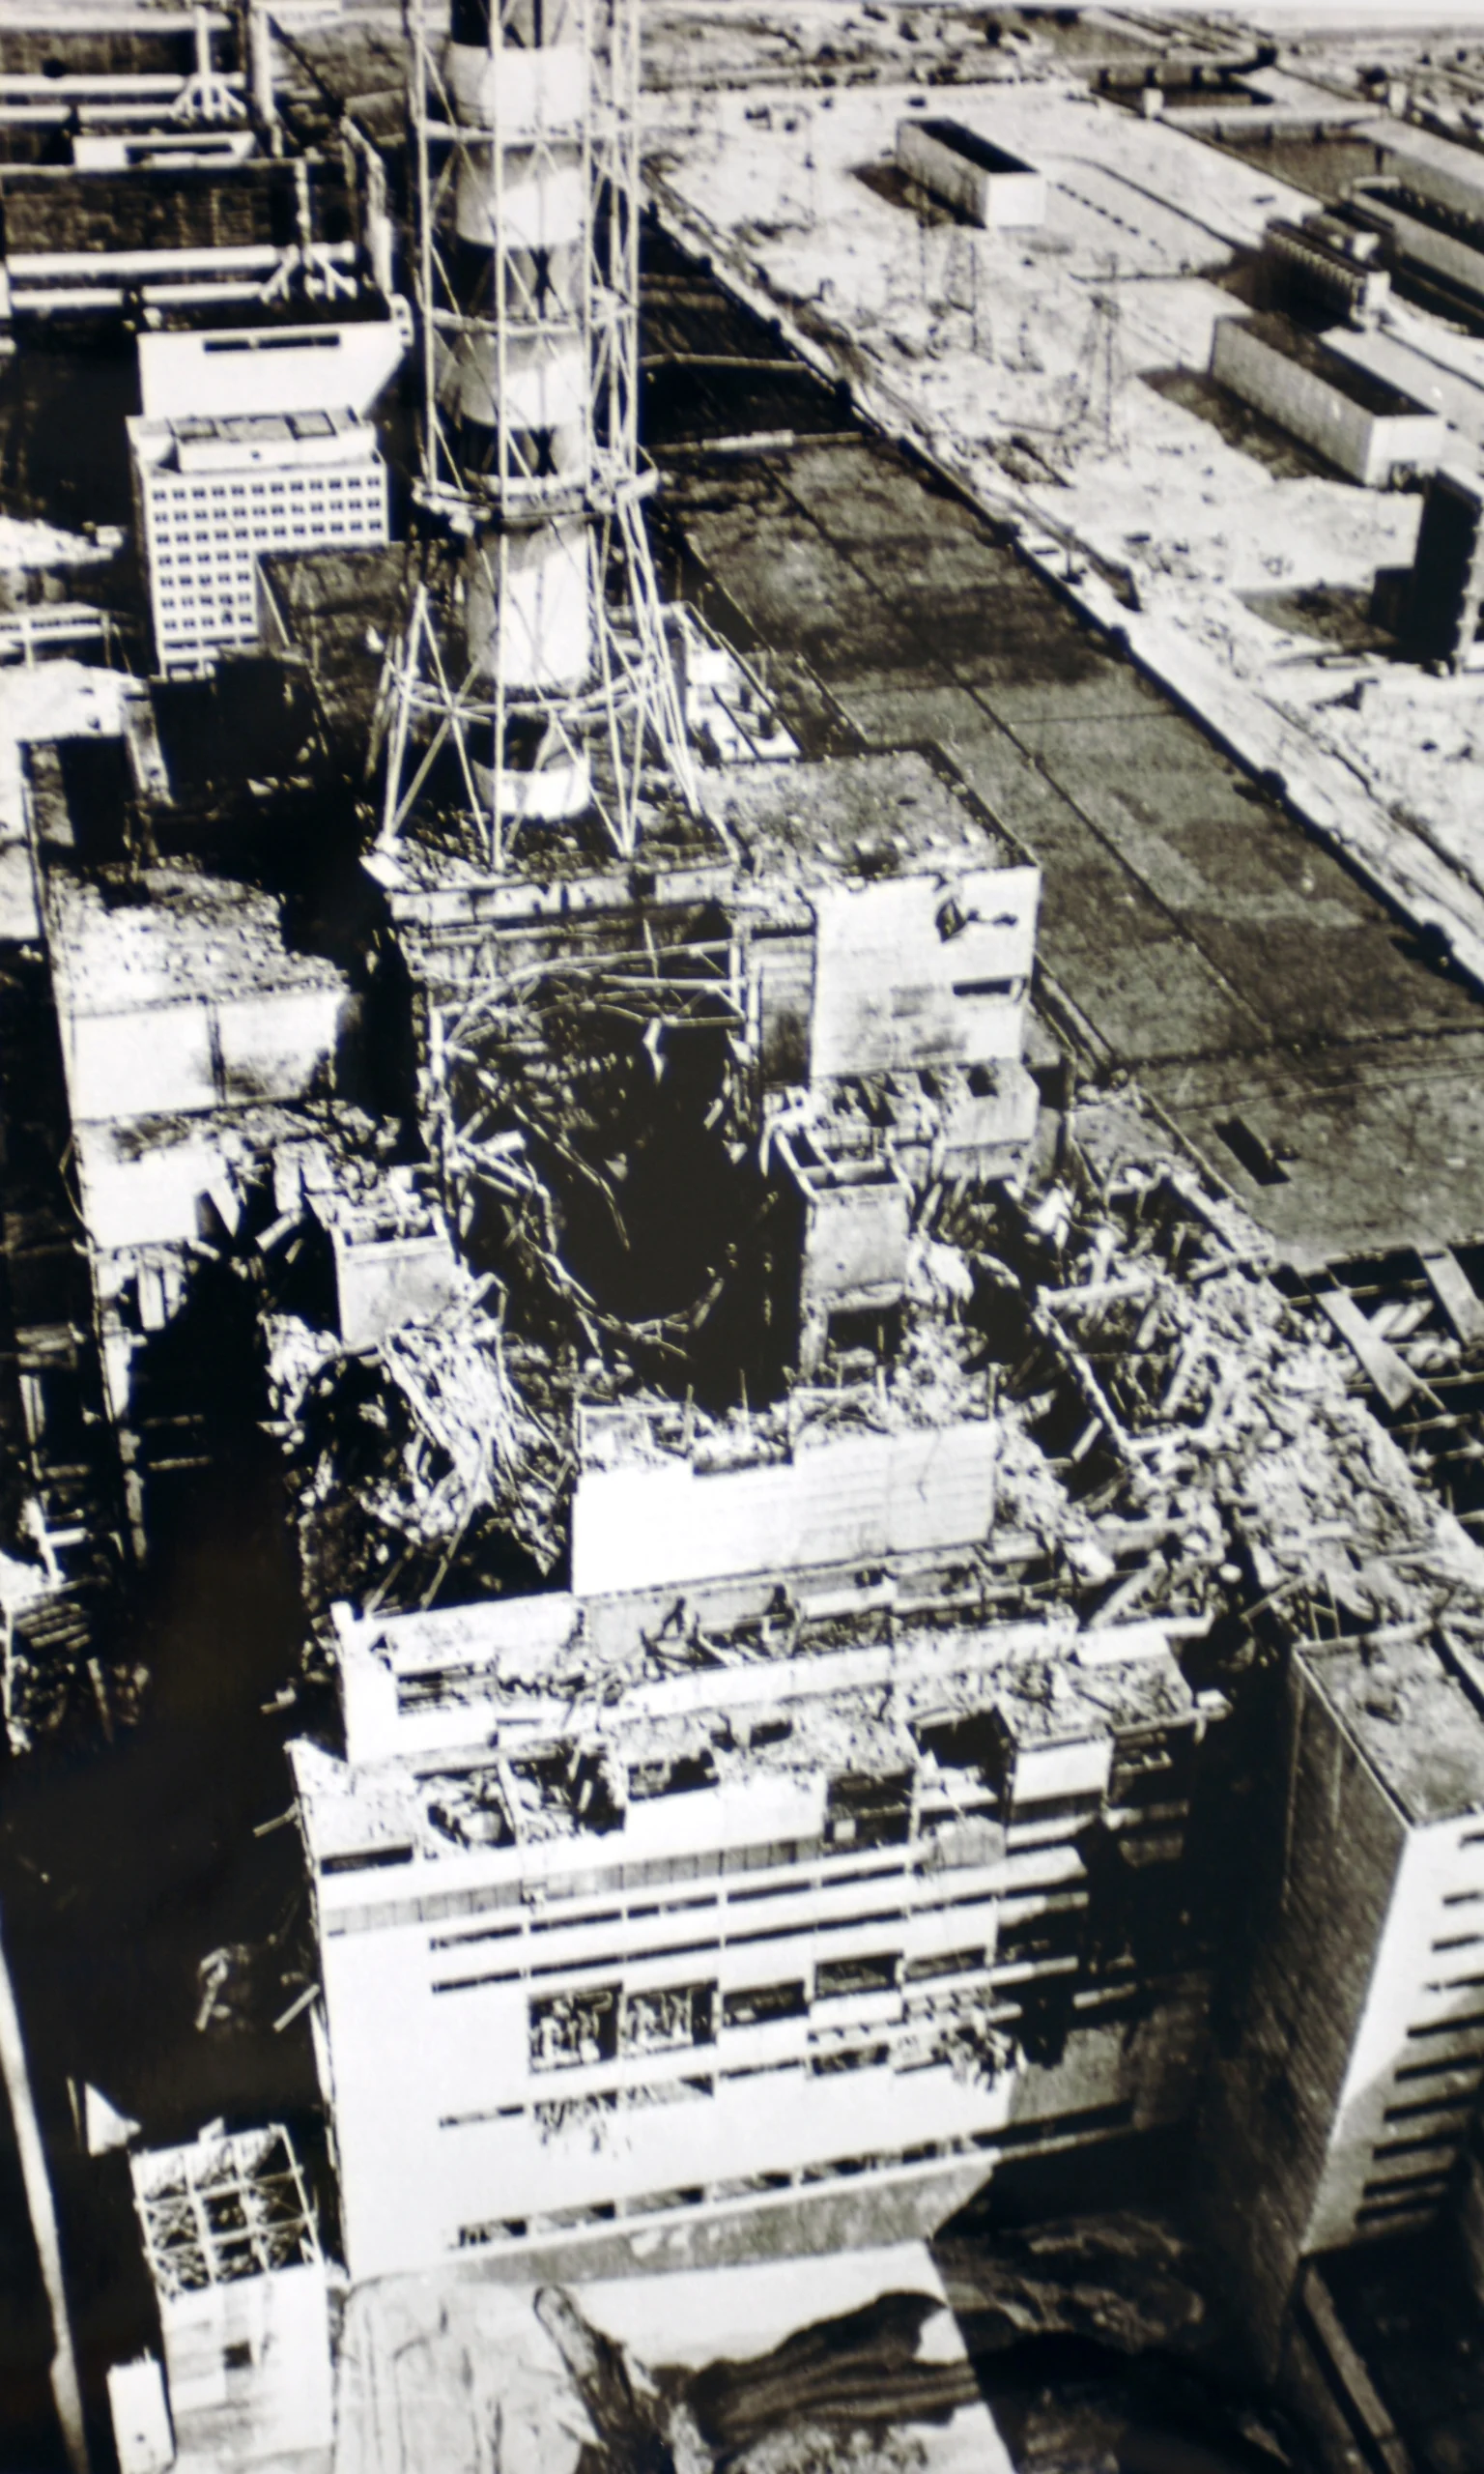 Chernobyl disaster, nuclear accident, aerial view, power plant, aftermath, radioactive release, structural damage, desolate landscape, historical photograph, environmental disaster